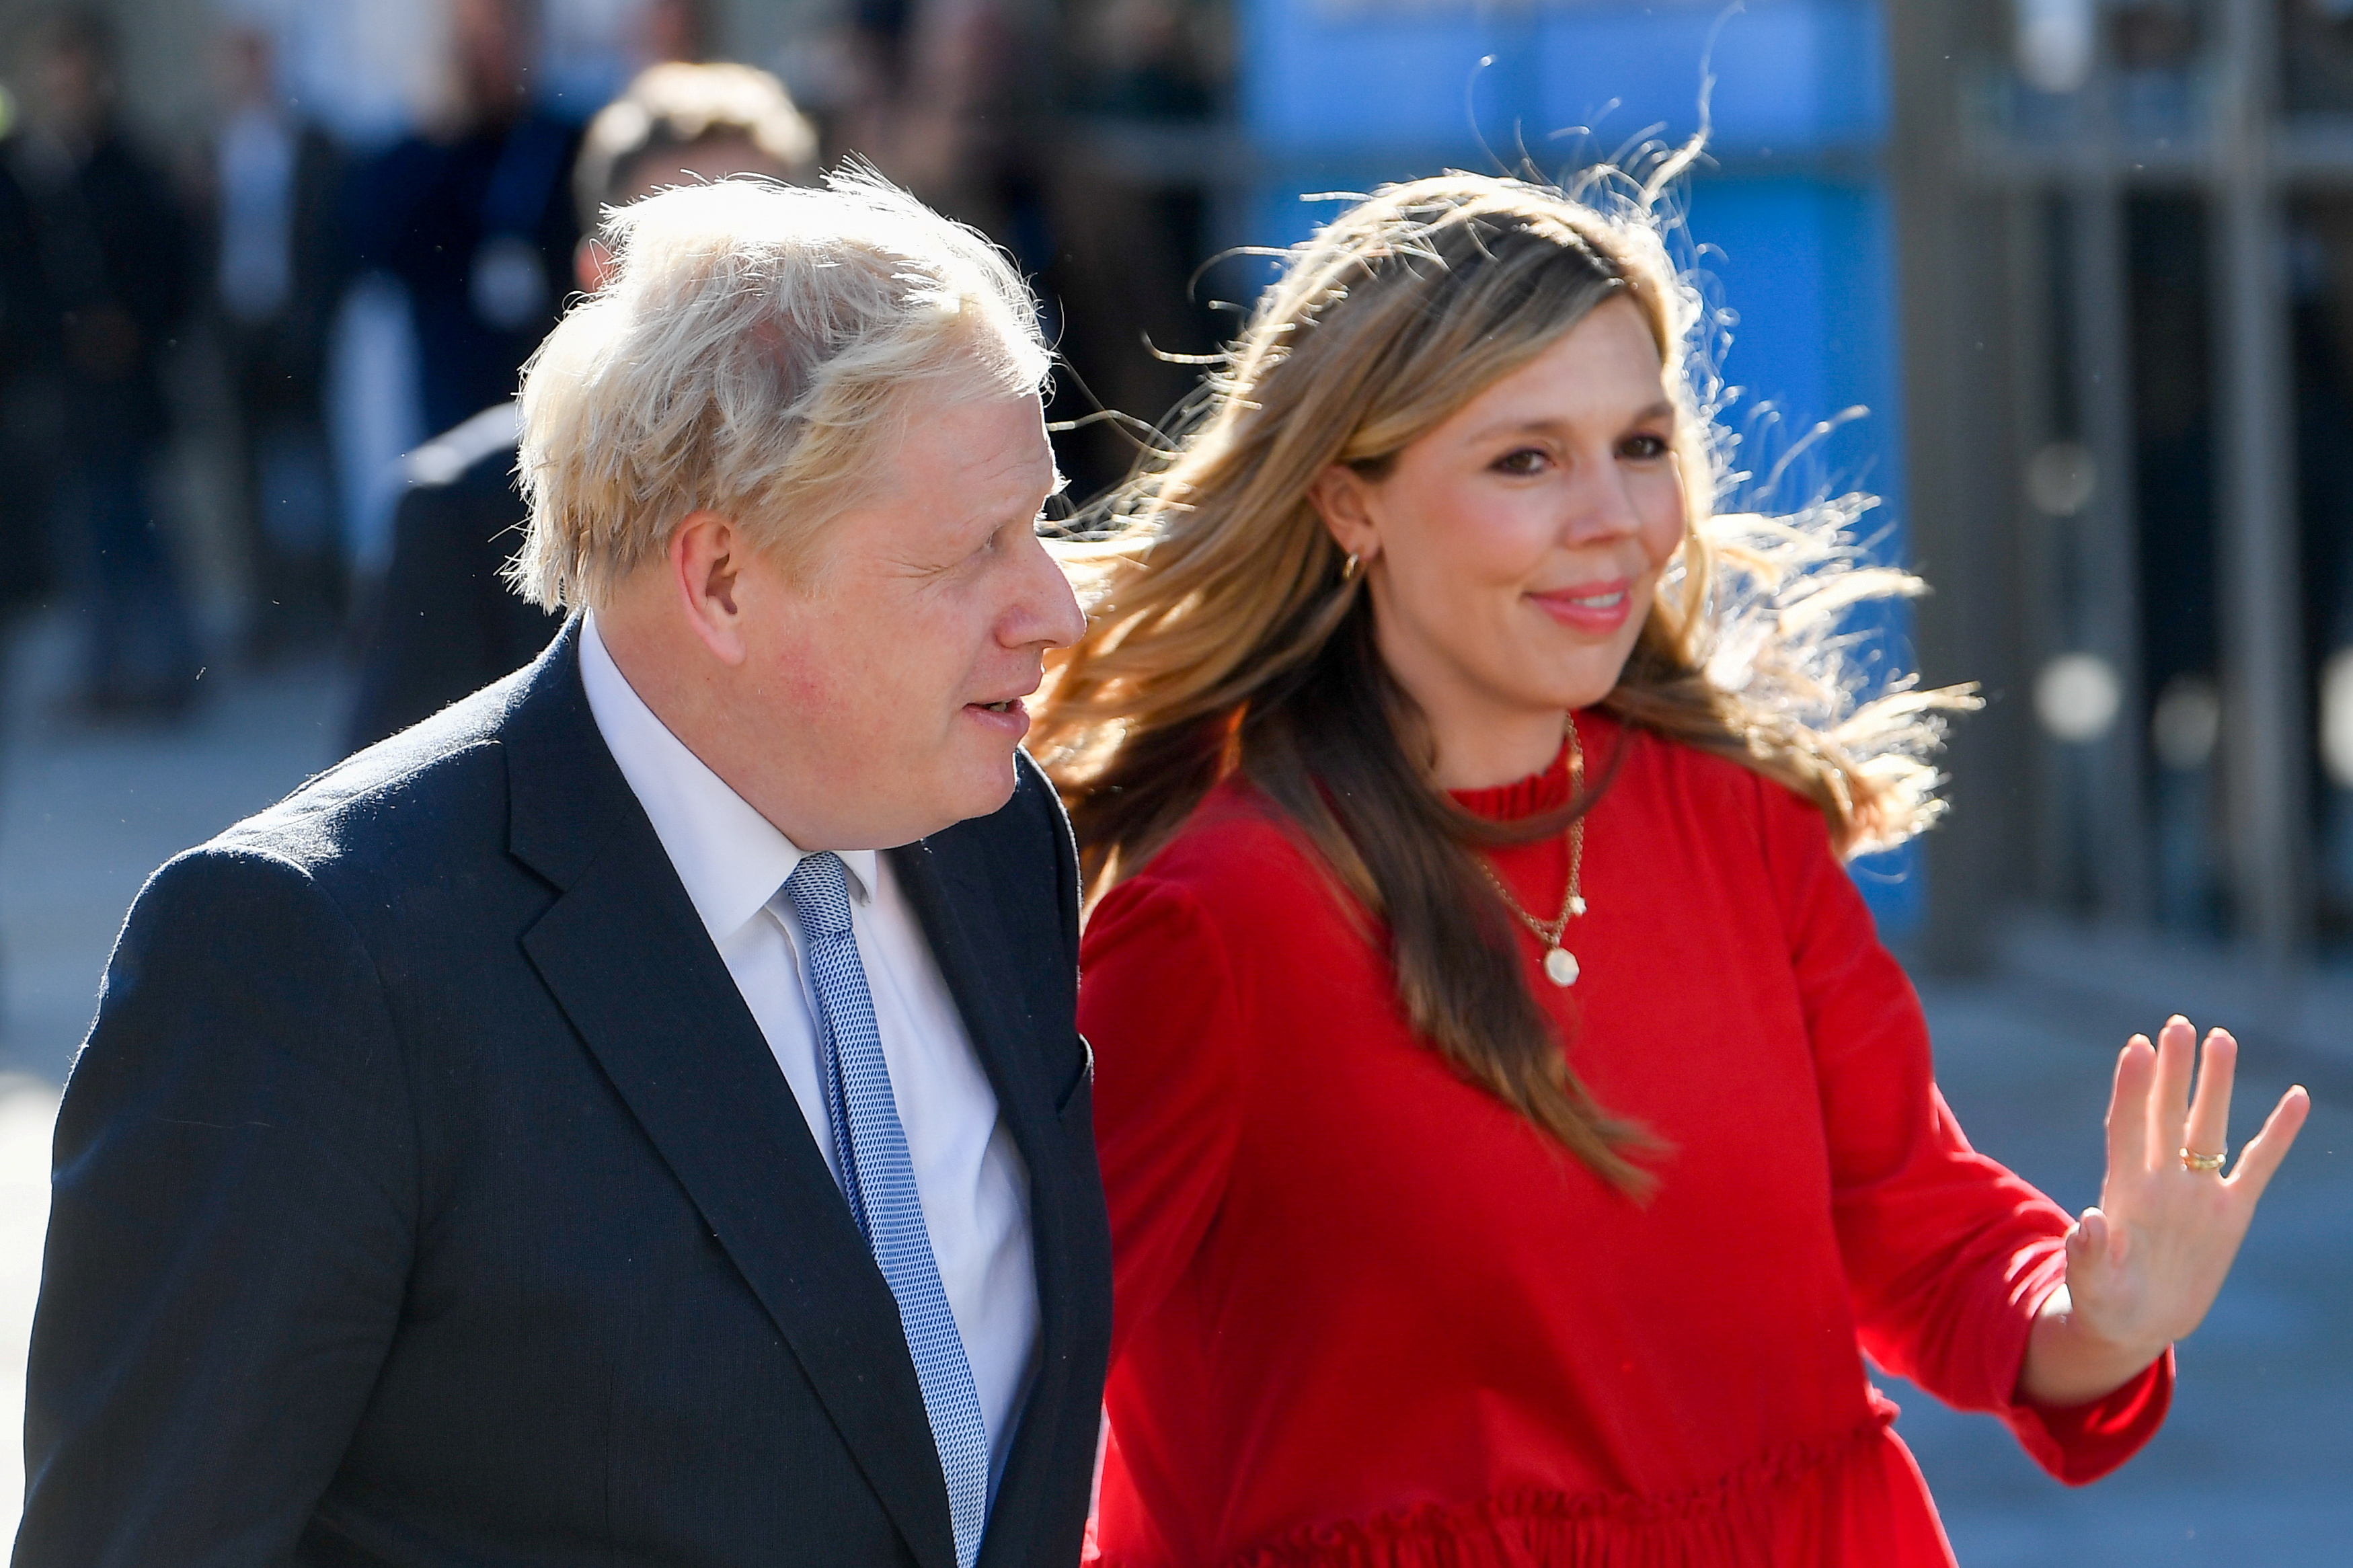 REUTERSUK PM Johnson and wife announce birth